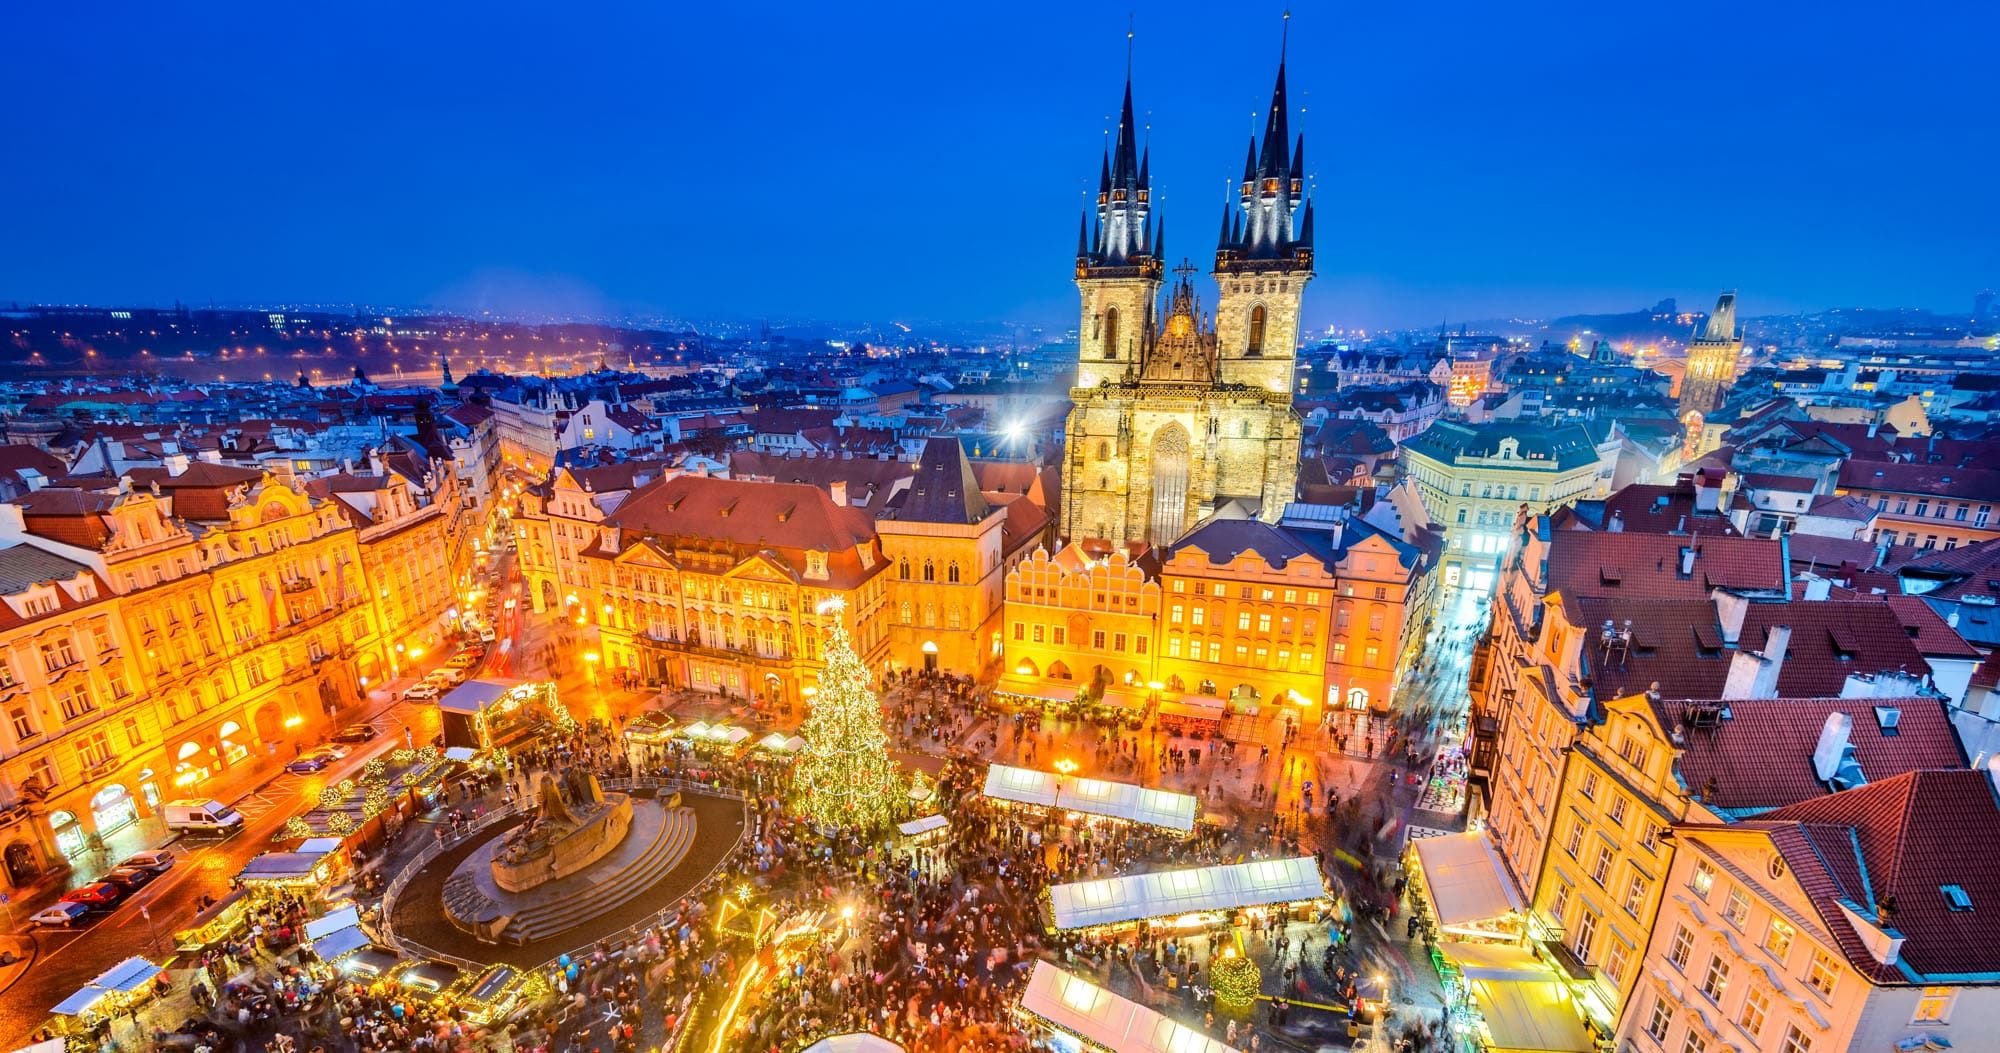 Featured image for “Christmas in Prague | Best Christmas Markets & Festive Things to Do”